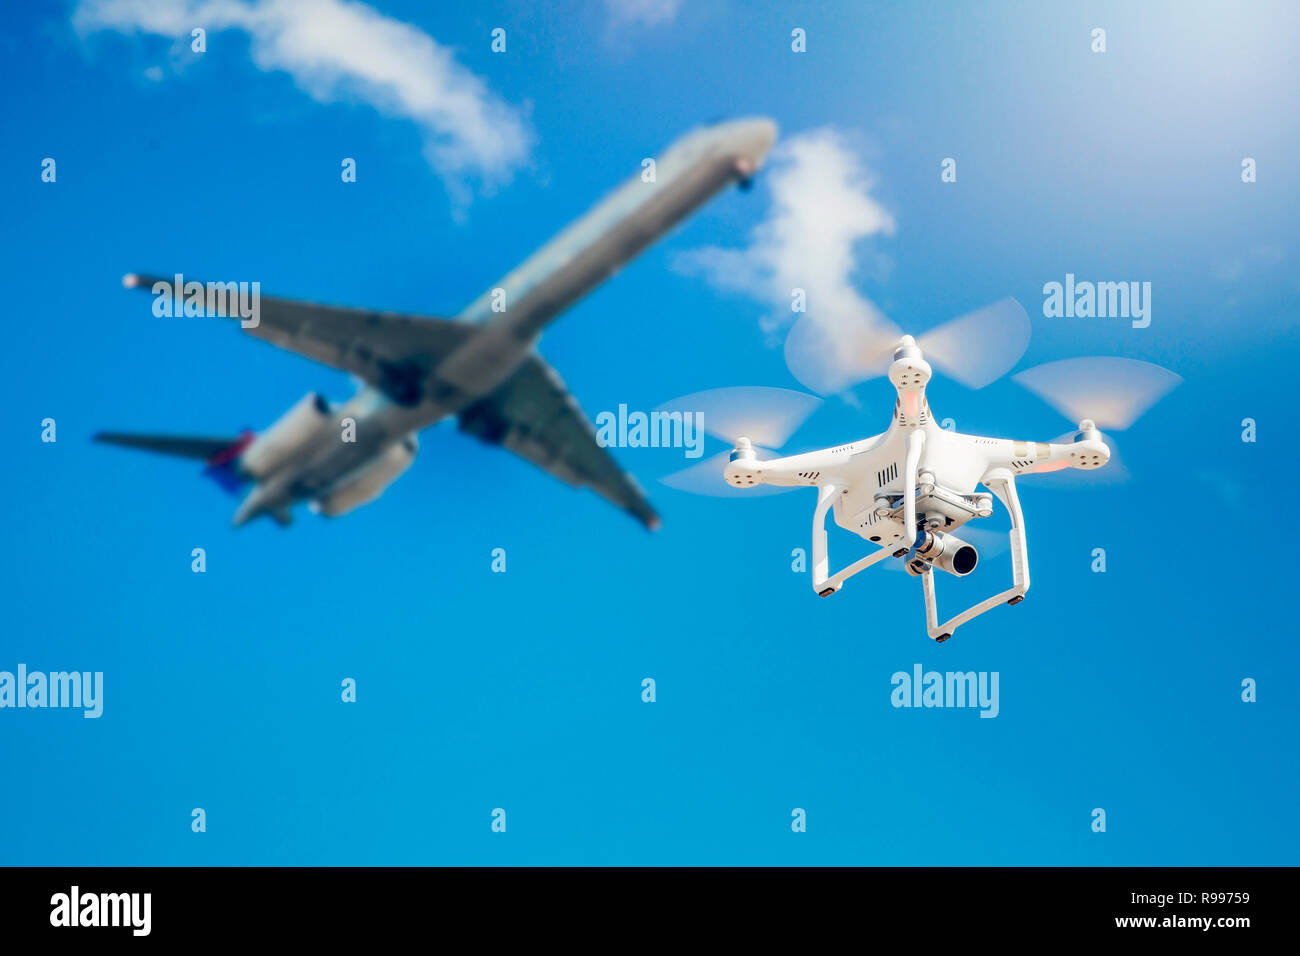 drone fly close to the commercial airplane near the airport Stock Photo